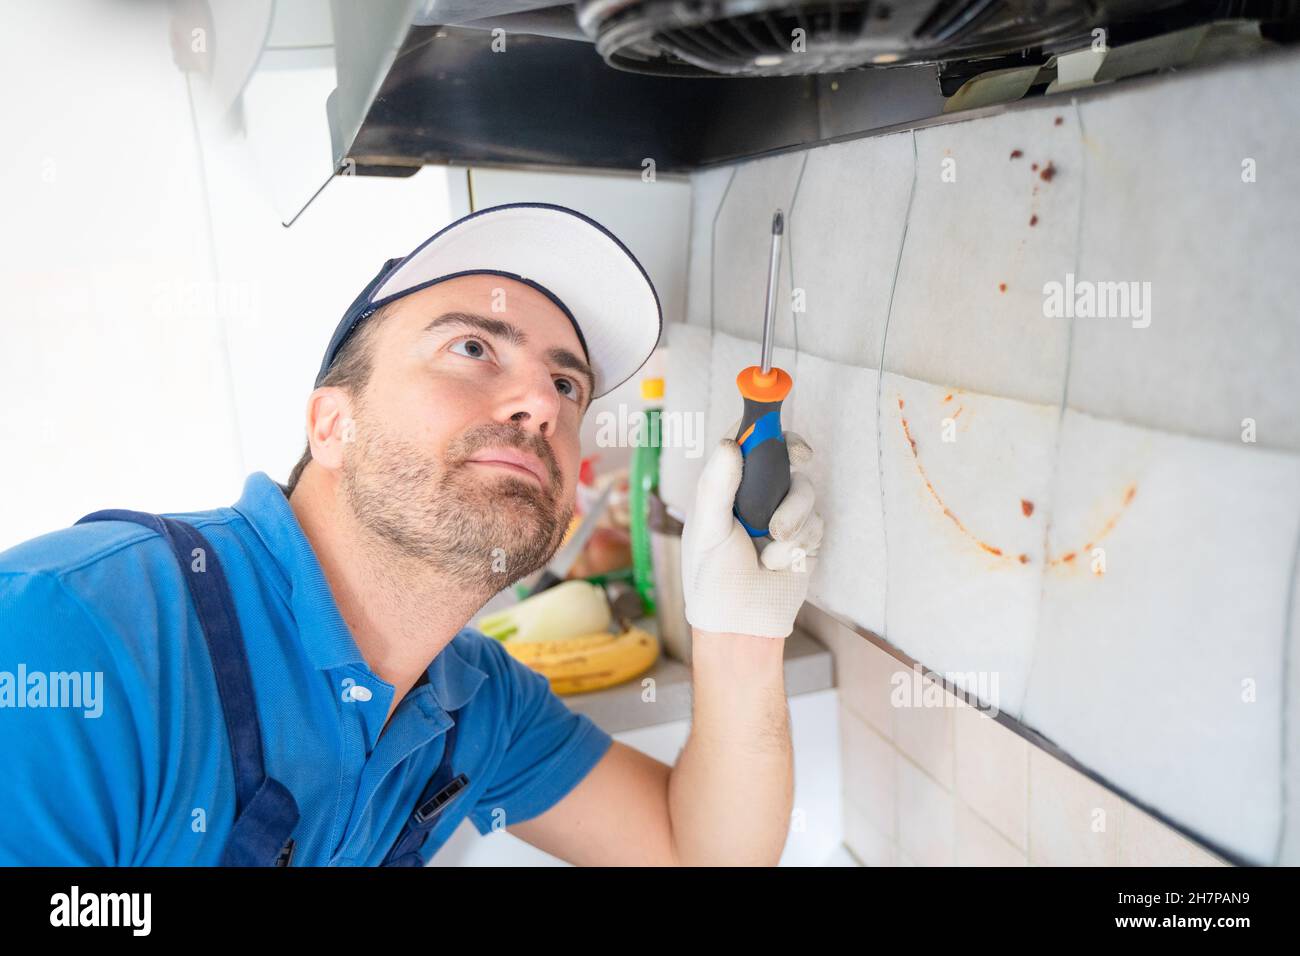 One repairman cleaning a kitchen hood air filter Stock Photo